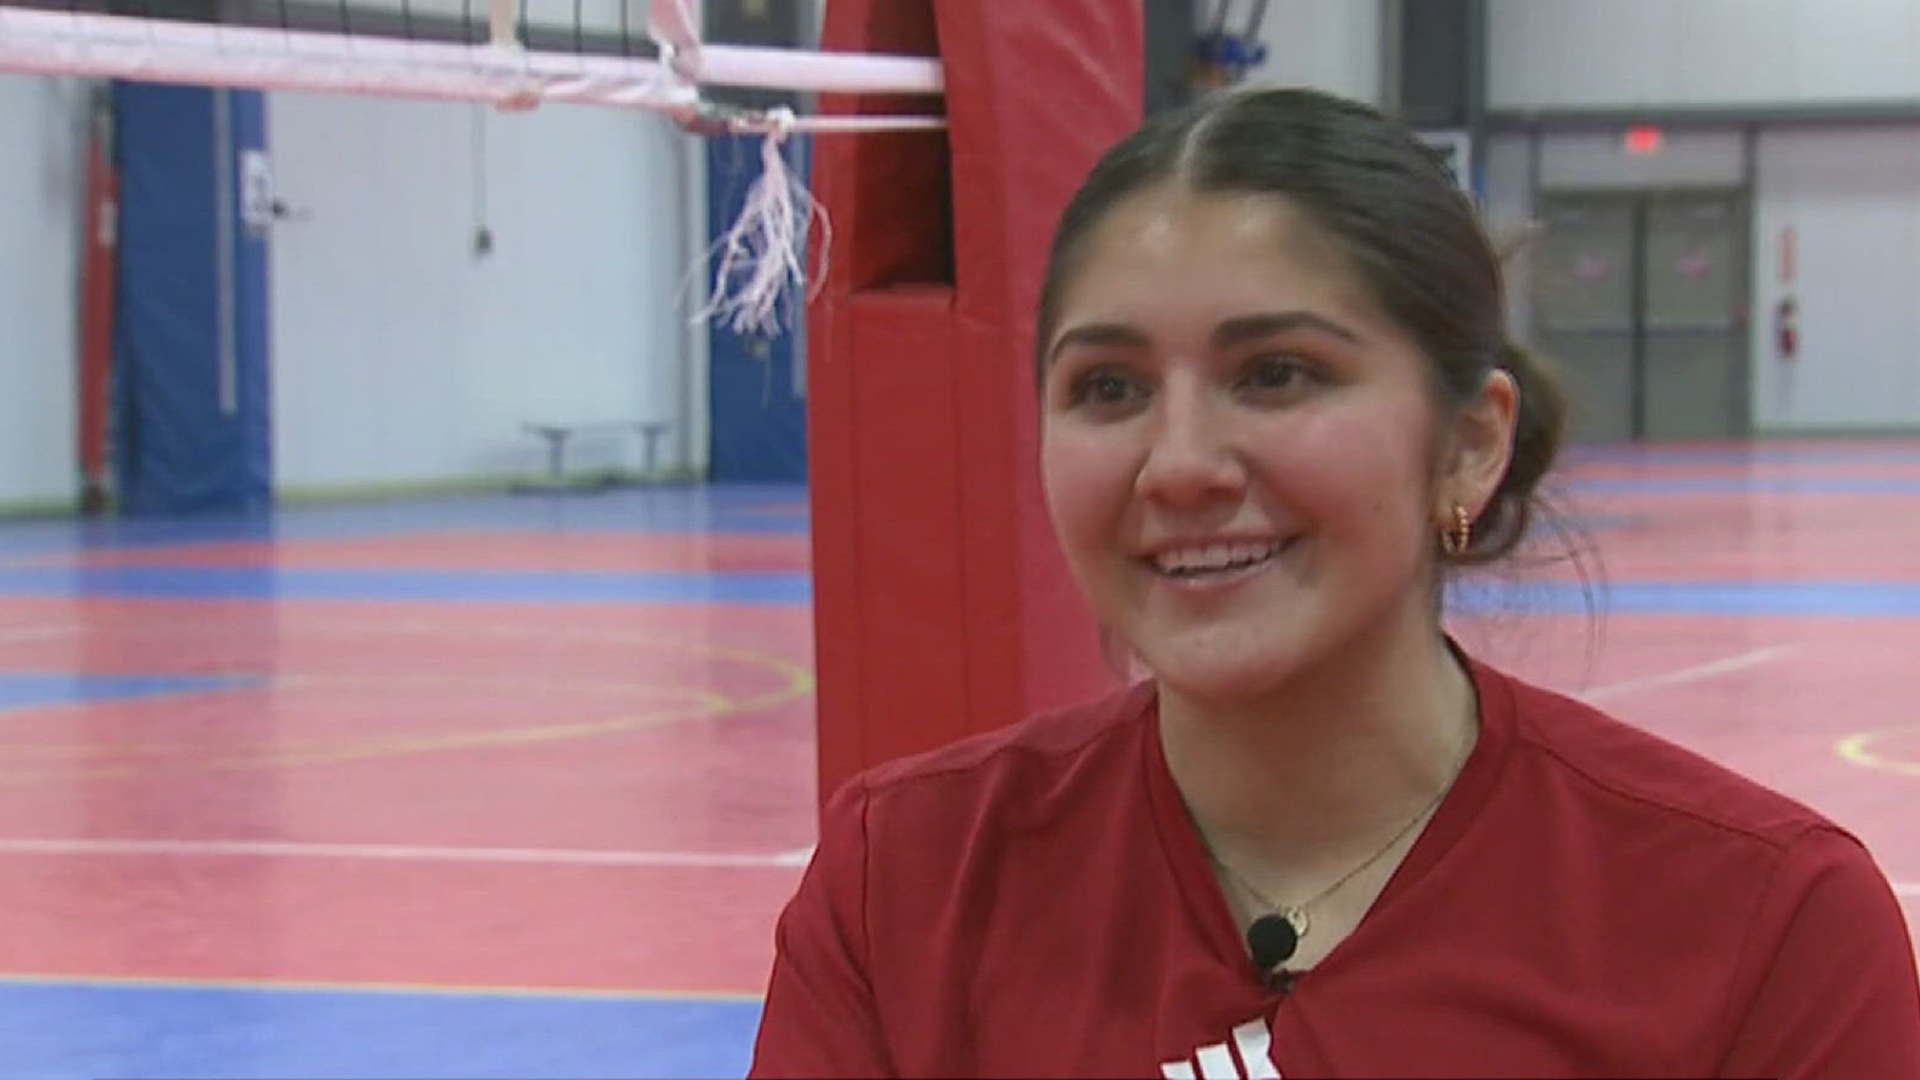 Lexi Rodriguez talks about her volleyball season at Nebraska, her recent camp she held and her upcoming Senior season with the Cornhuskers.